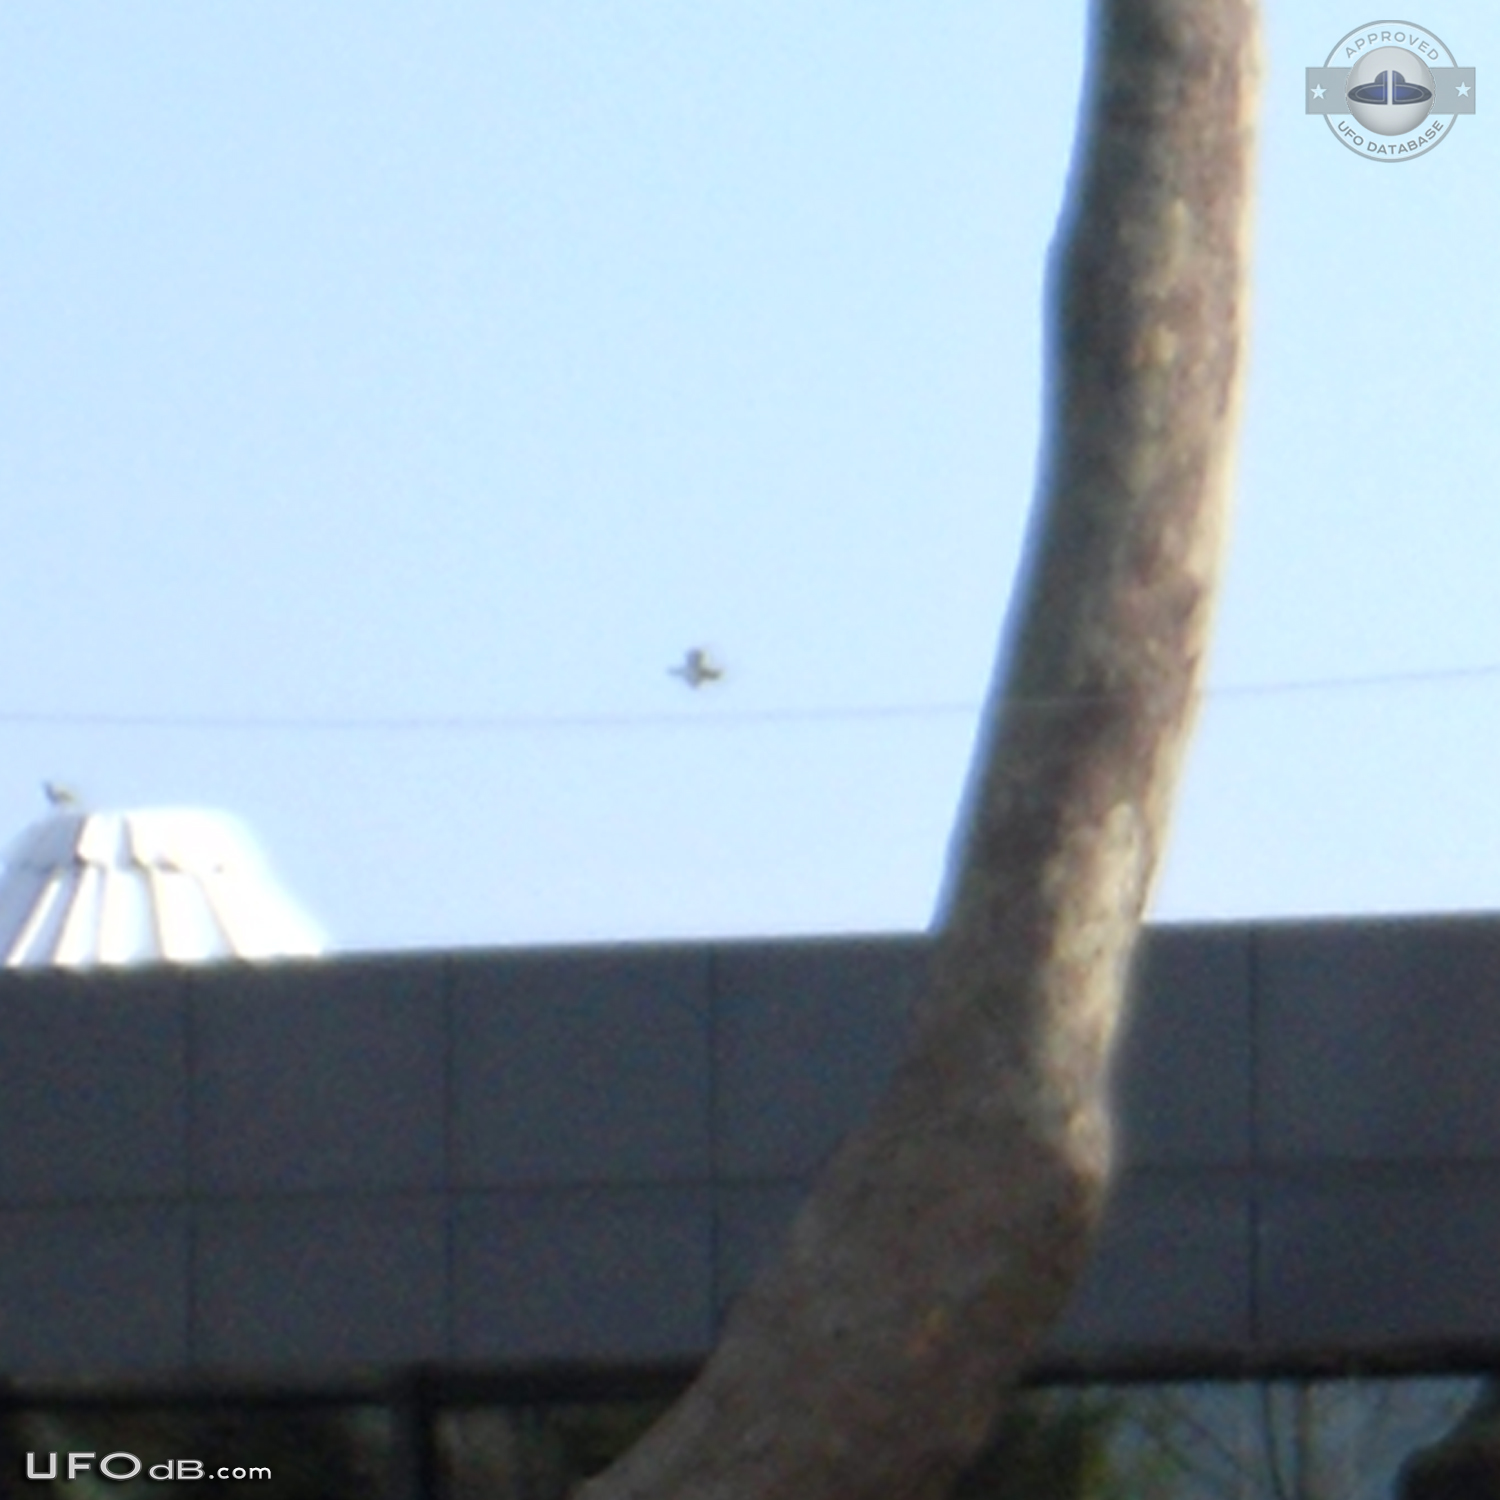 Strange Shaped UFO rarely seen caught on picture Istanbul Turkey 2014 UFO Picture #568-3